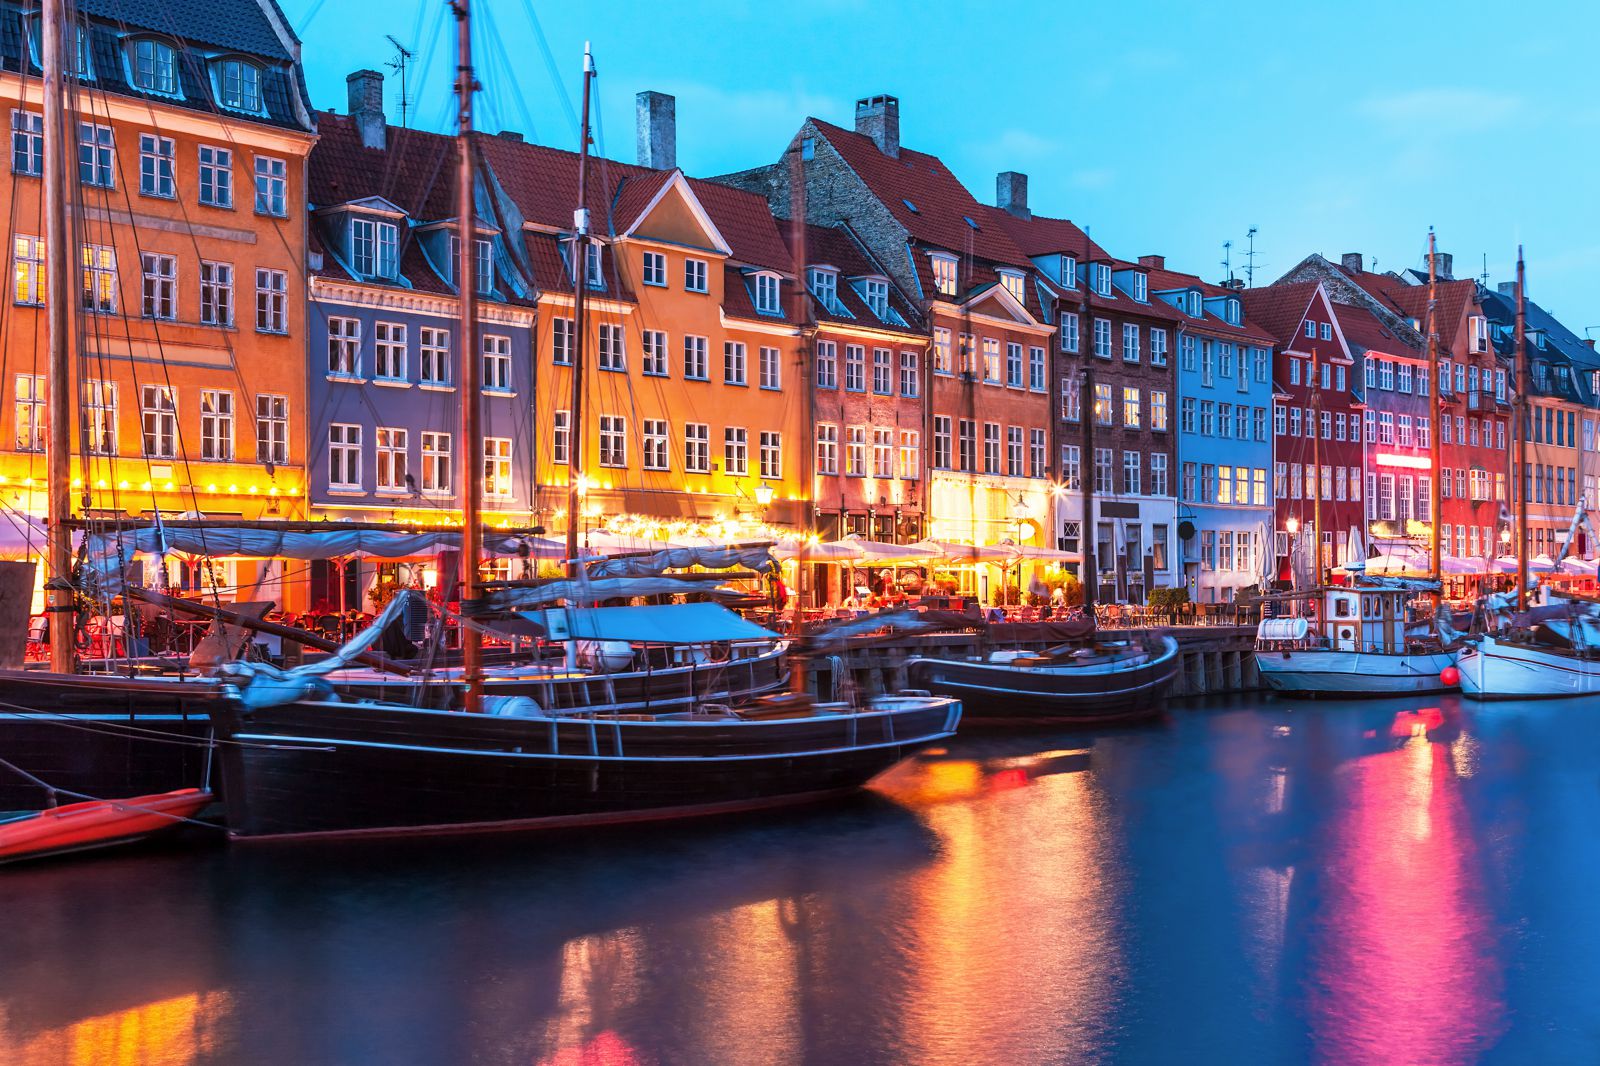 The Complete Guide On All The Things To See, Eat And Do In Copenhagen